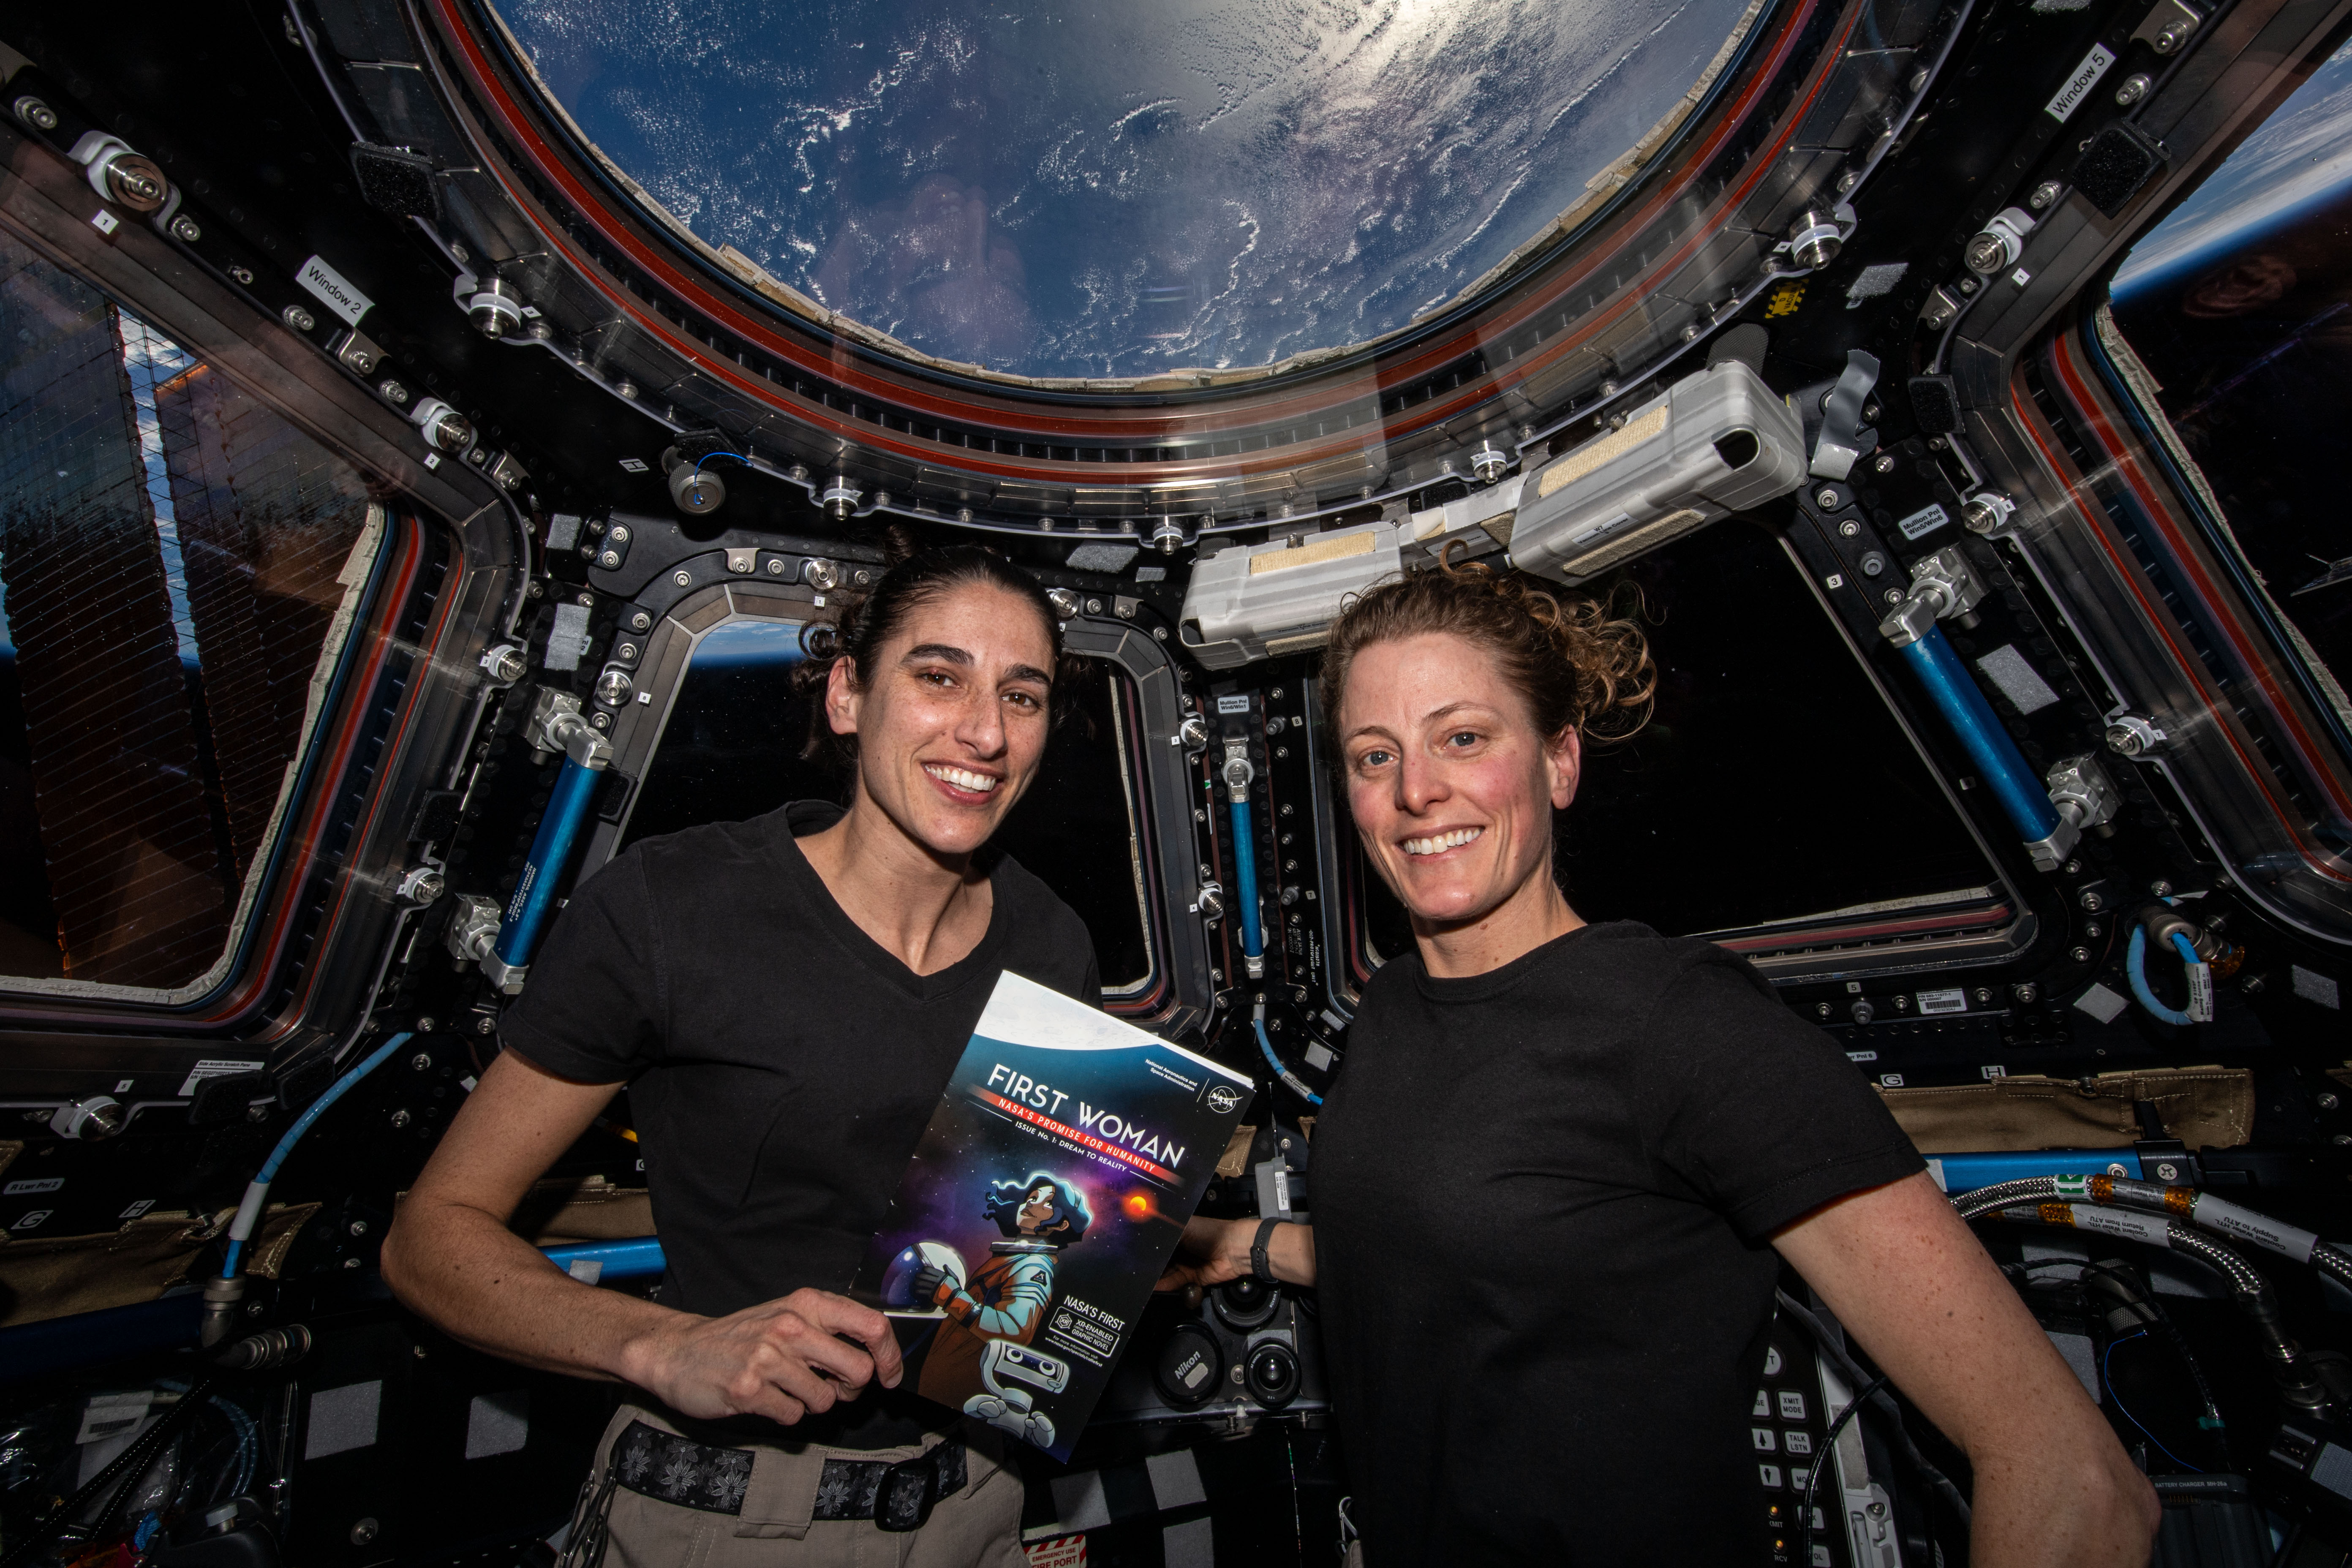 Two astronauts, Jasmin Moghbeli (left) and Loral O’Hara in the cupola of the International Space Station. The cupola has several windows; in the top round window, we can see Earth. The astronauts wear black t-shirts and smile at the camera. Moghbeli holds a copy of First Woman, NASA's official graphic novel about a fictional astronaut who is the first woman to explore the Moon.